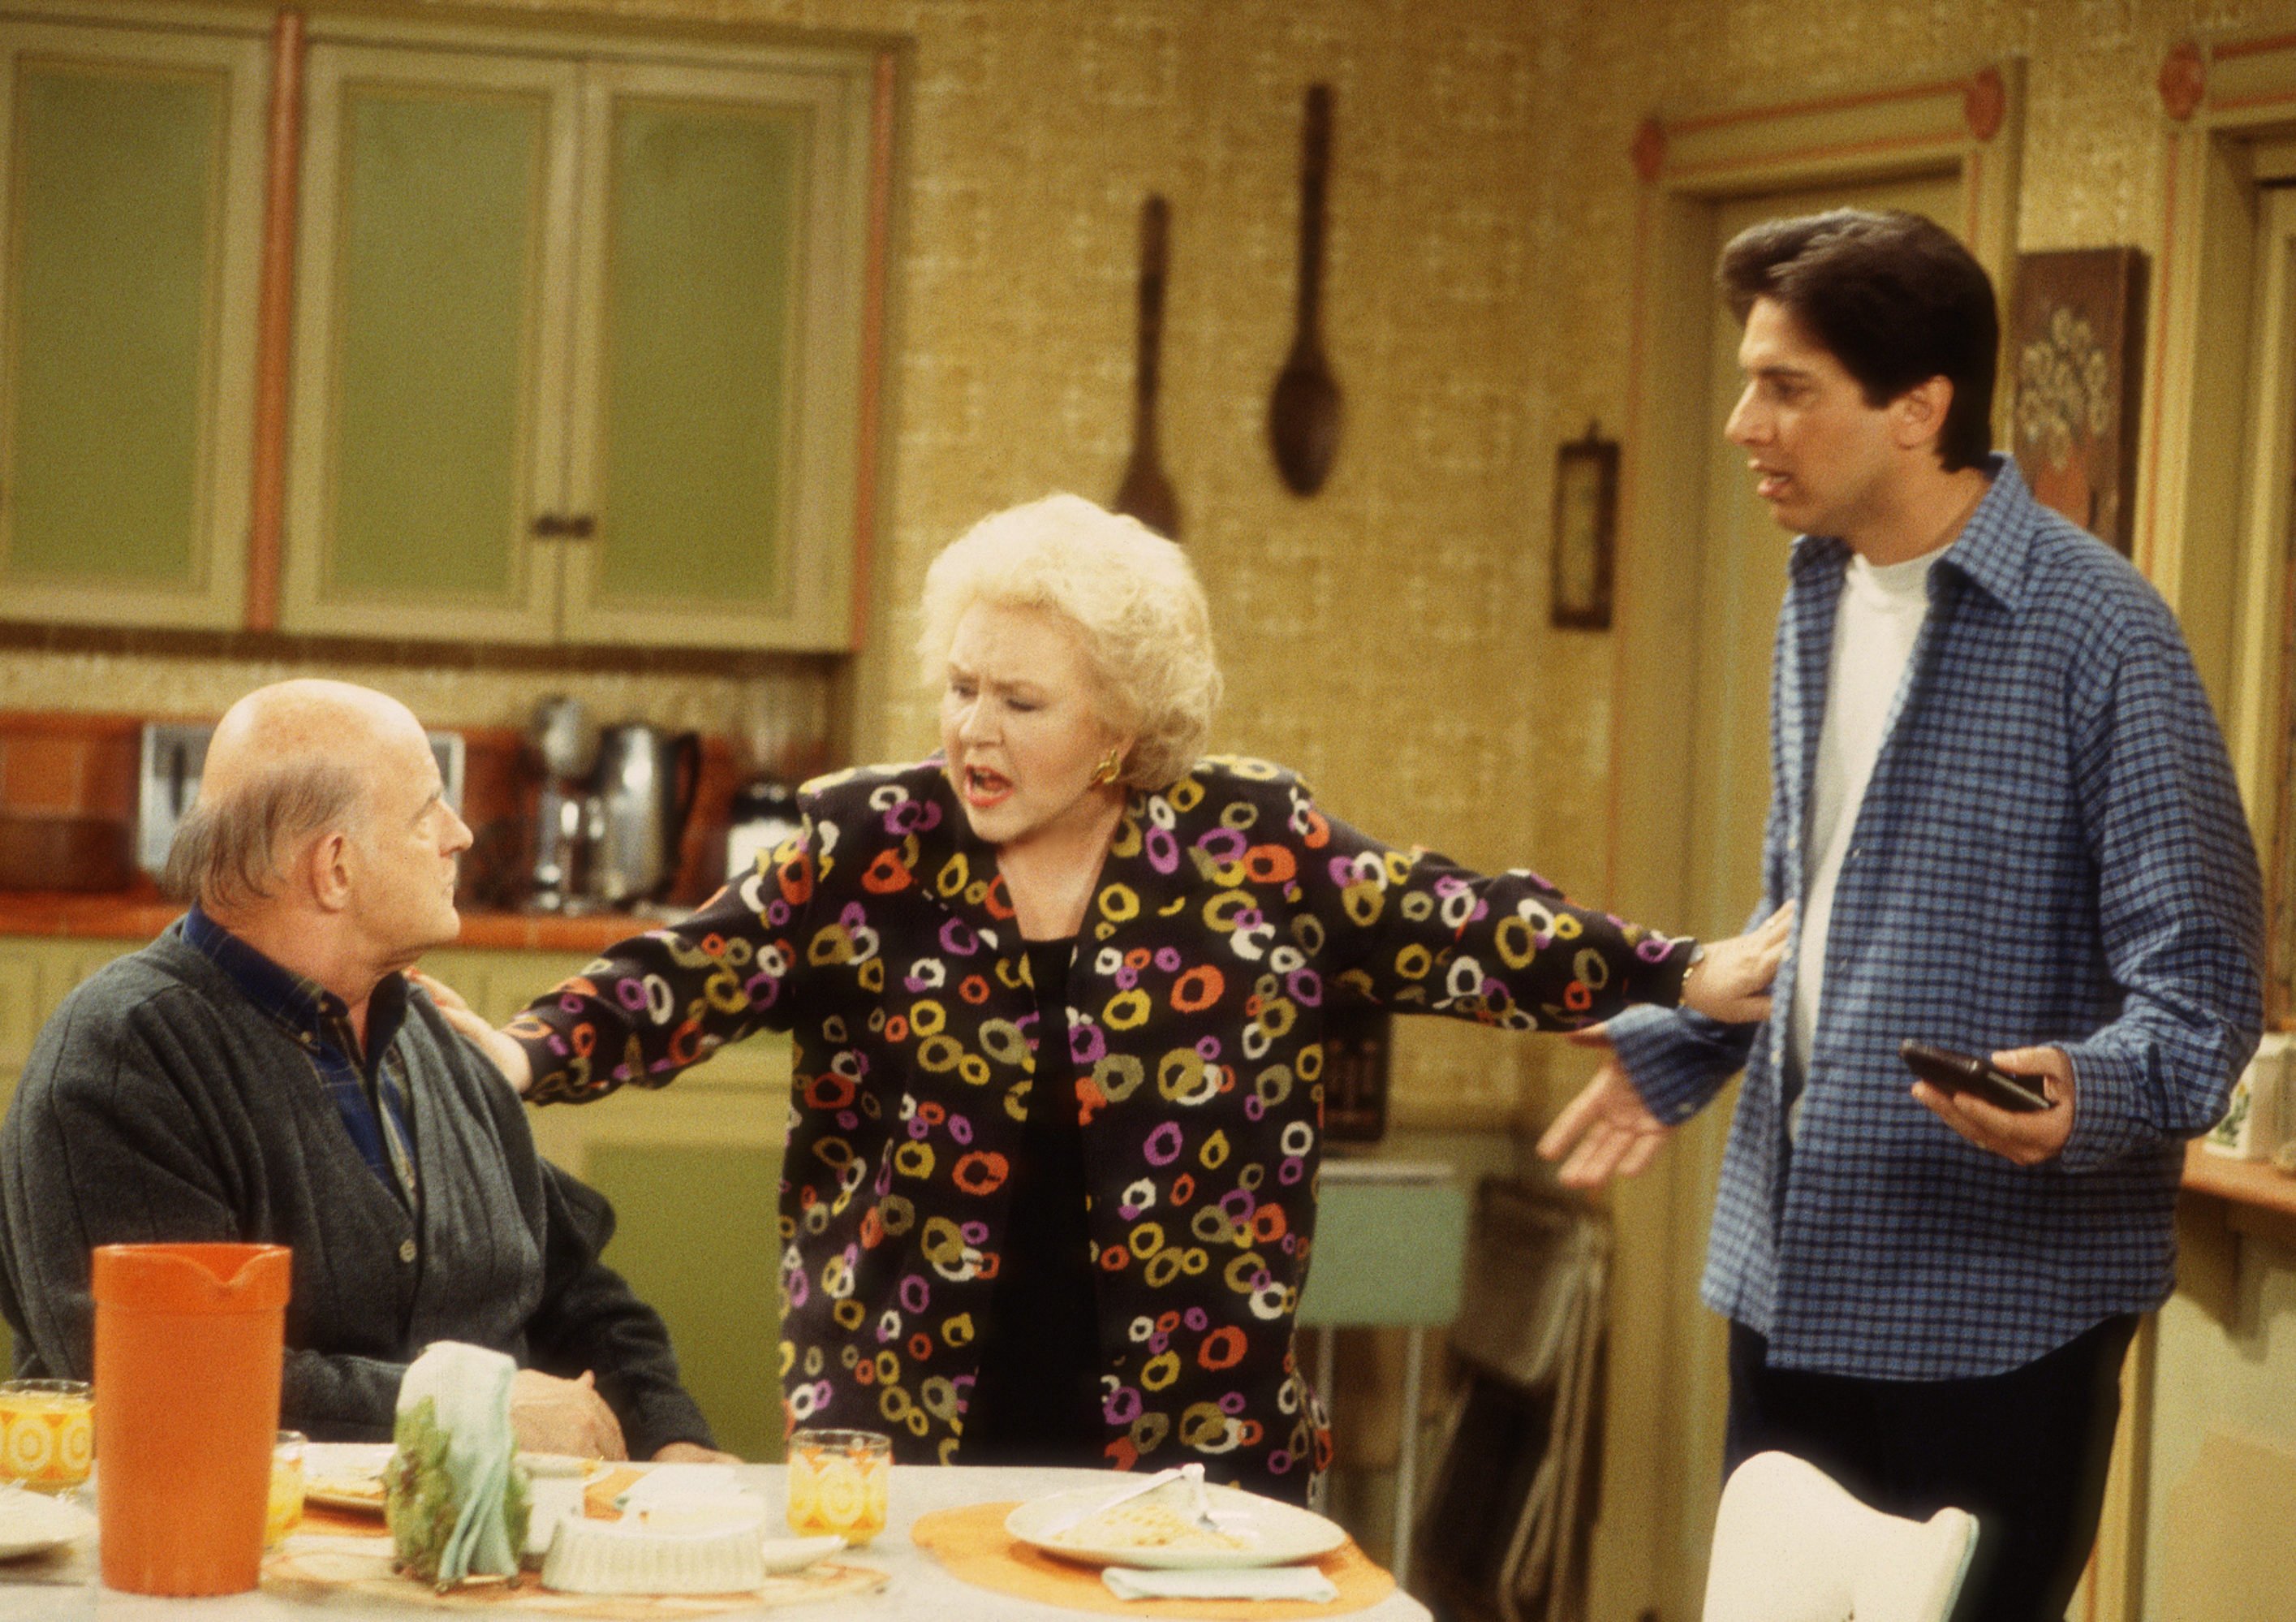 A 1996 scene from 'Everybody Loves Raymond' with, left to right, Peter Boyle, Doris Roberts, and Ray Romano.